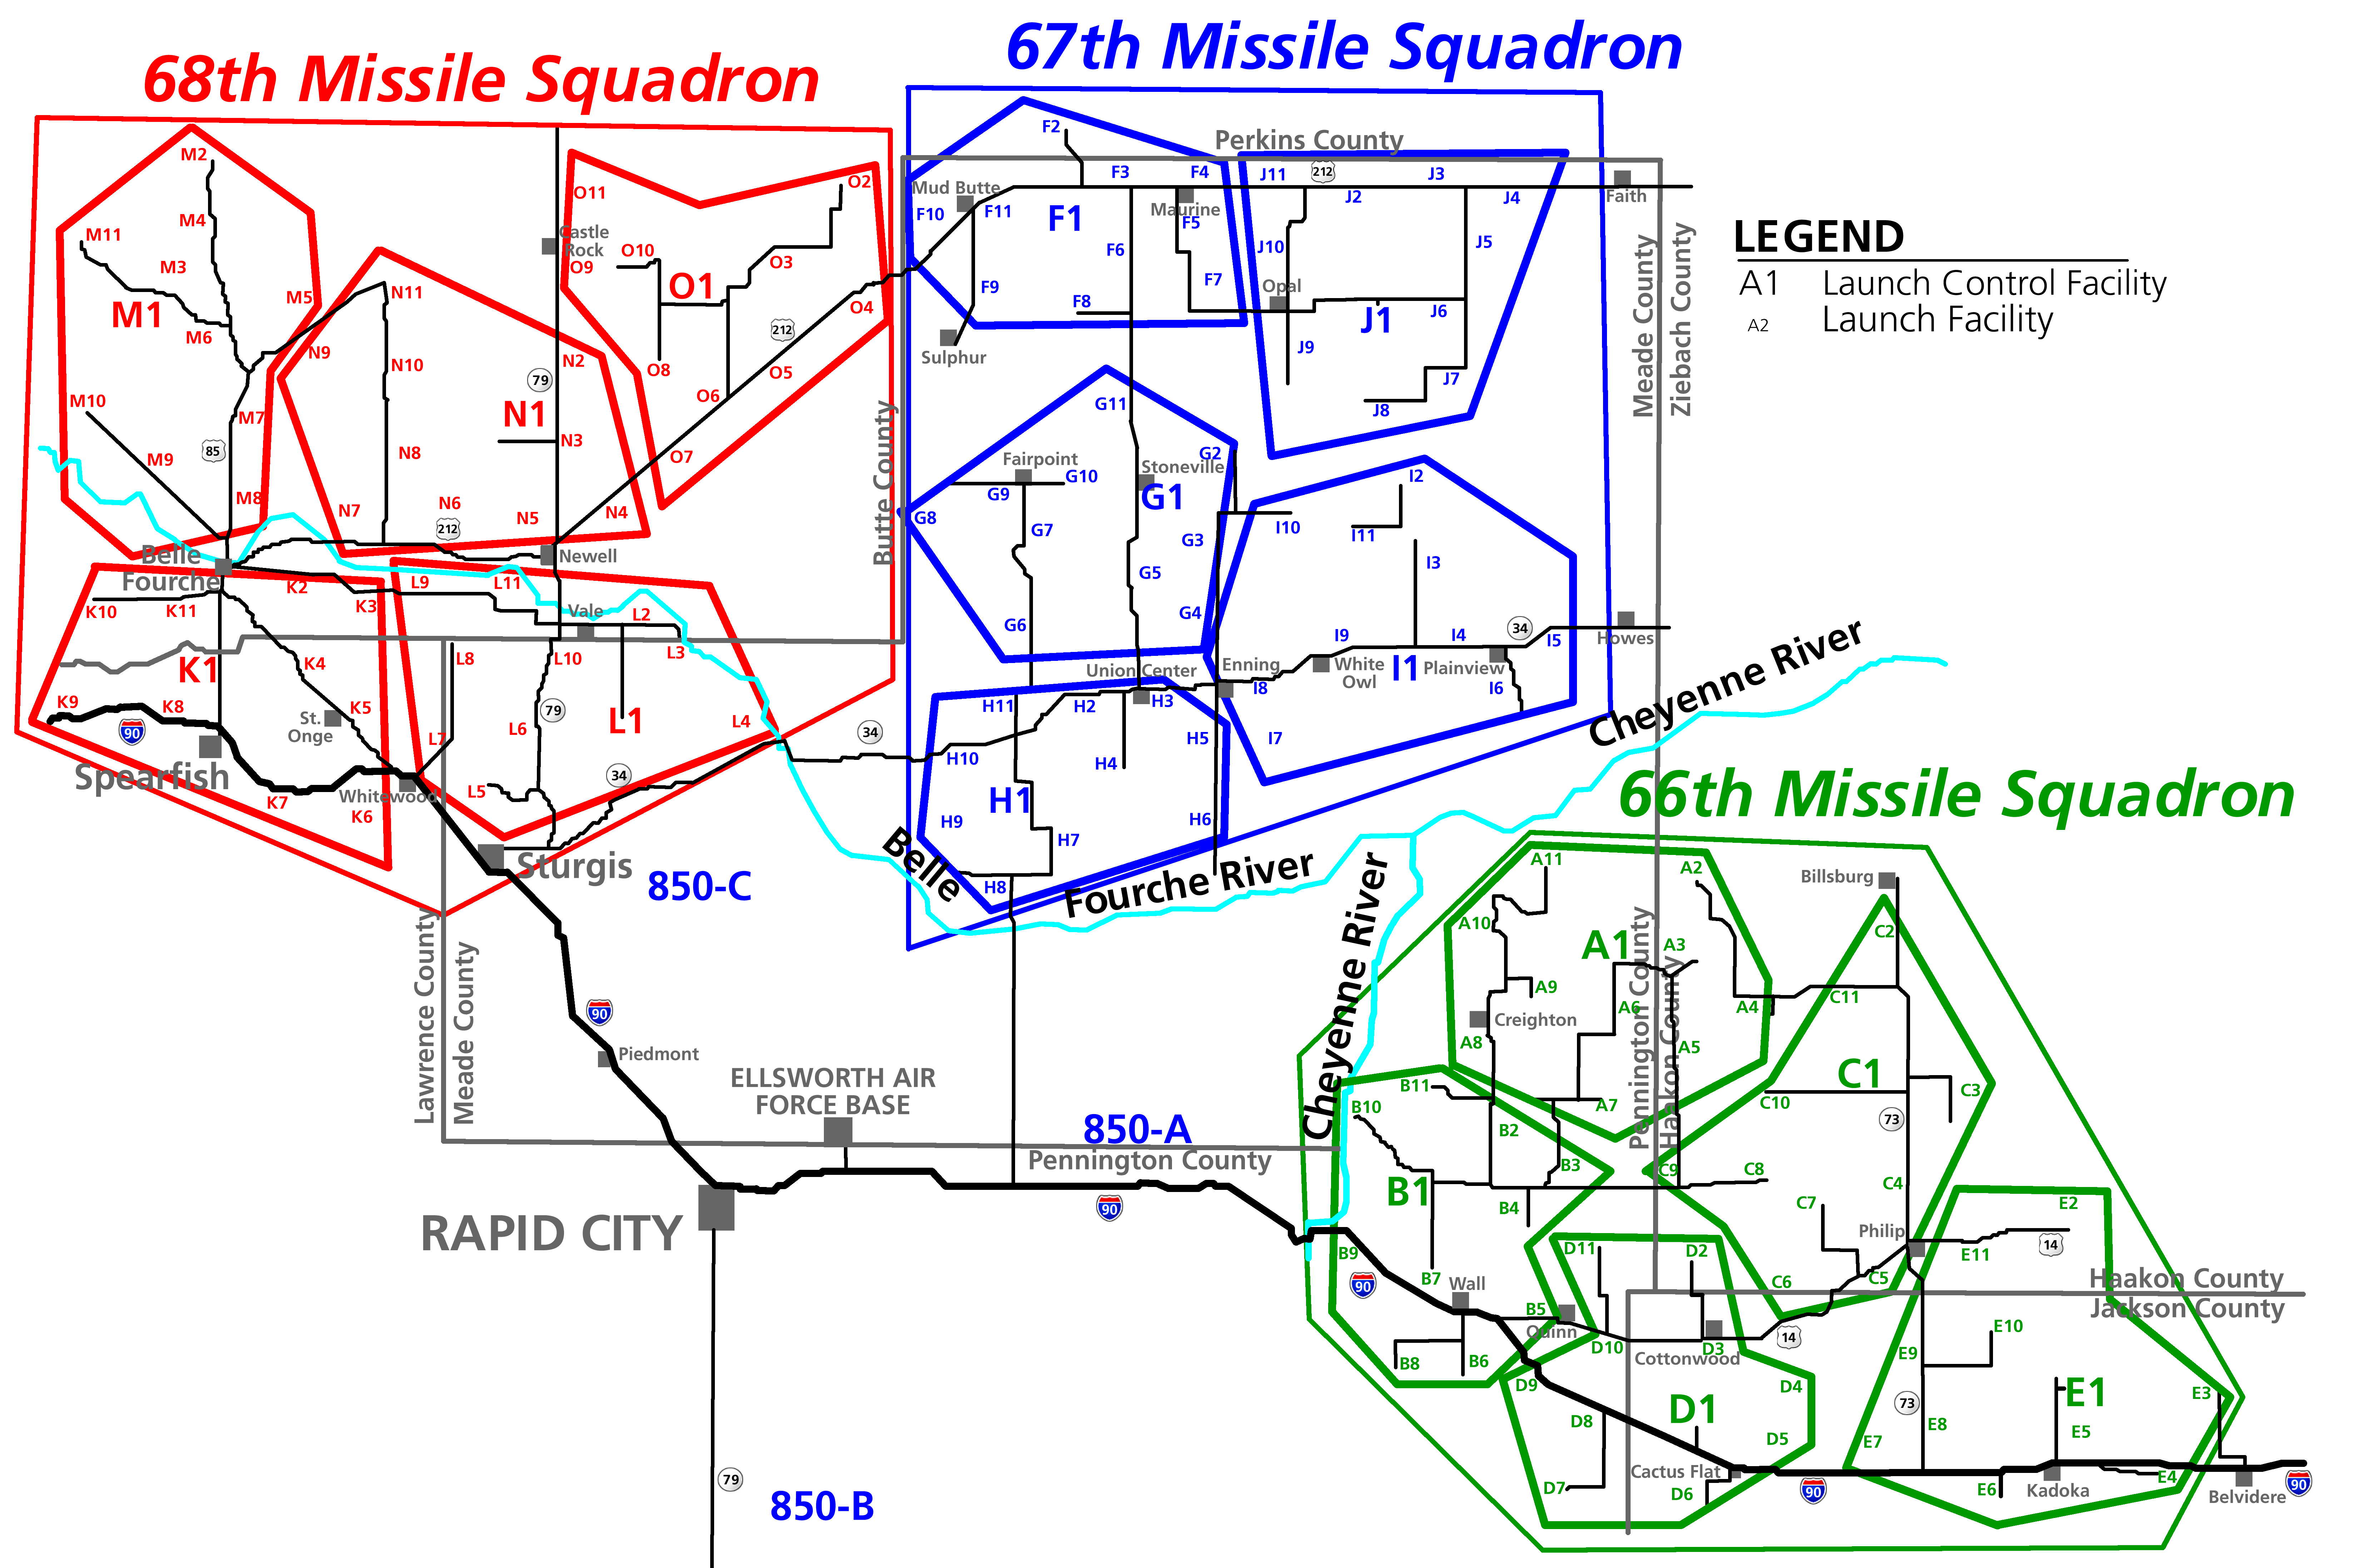 Active Missile Silos Map